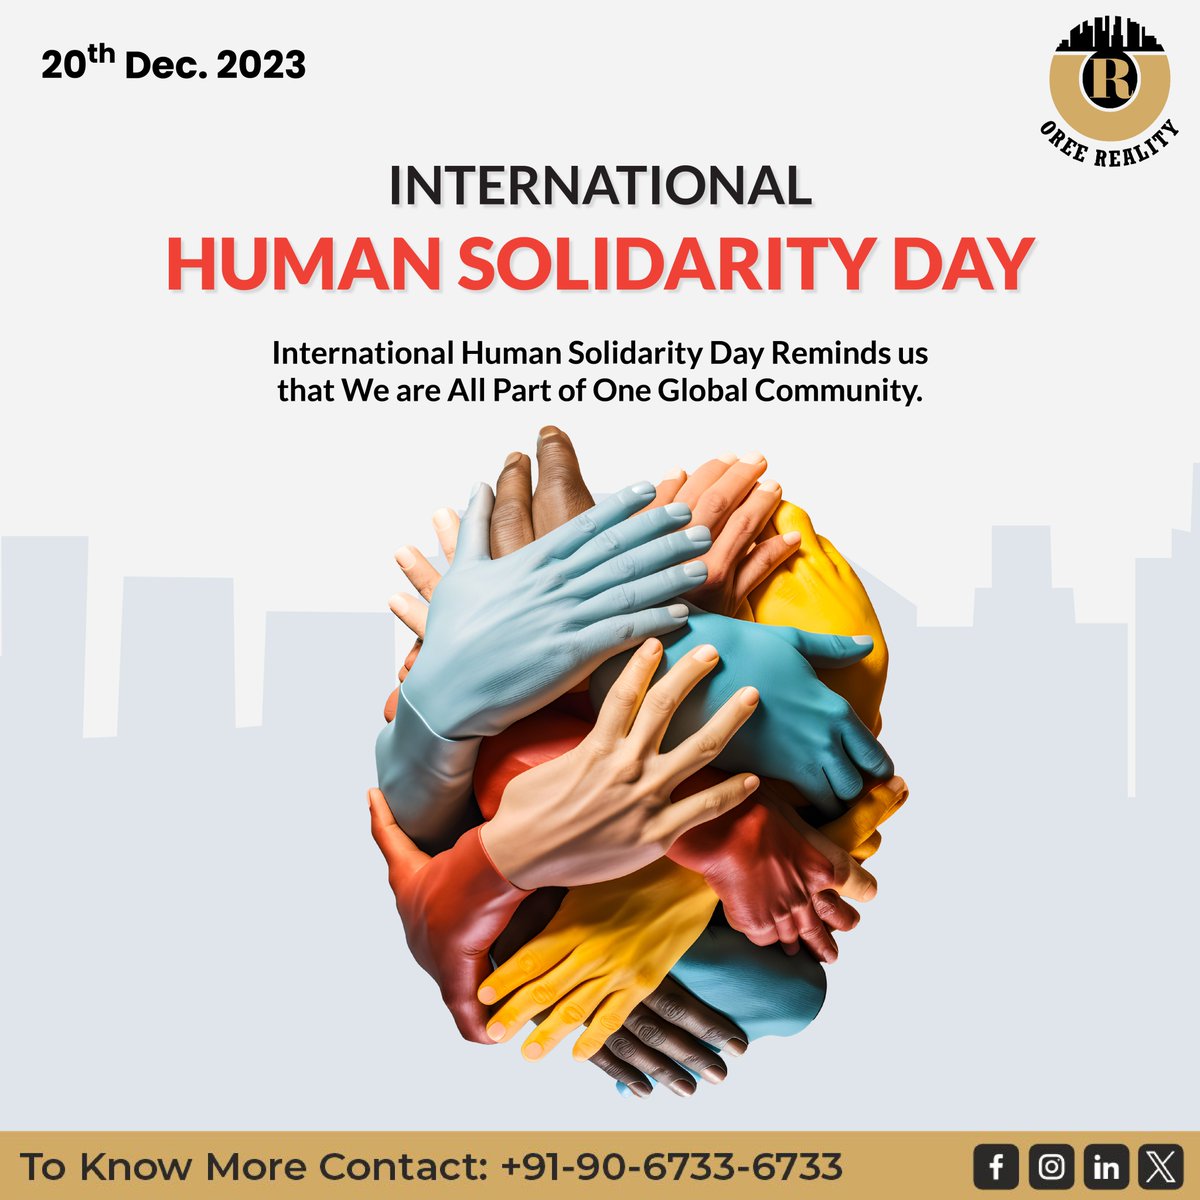 Solidarity is the cornerstone of strong communities. Oree Reality wishes you a day filled with shared joy and togetherness. 💙

Contact us at-+91-90-6733-6733

#Oreereality #Cloud51 #RealEstate #Realestatepune #InternationalHumanSolidarityDay #InternationalHumanSolidarityDay2023